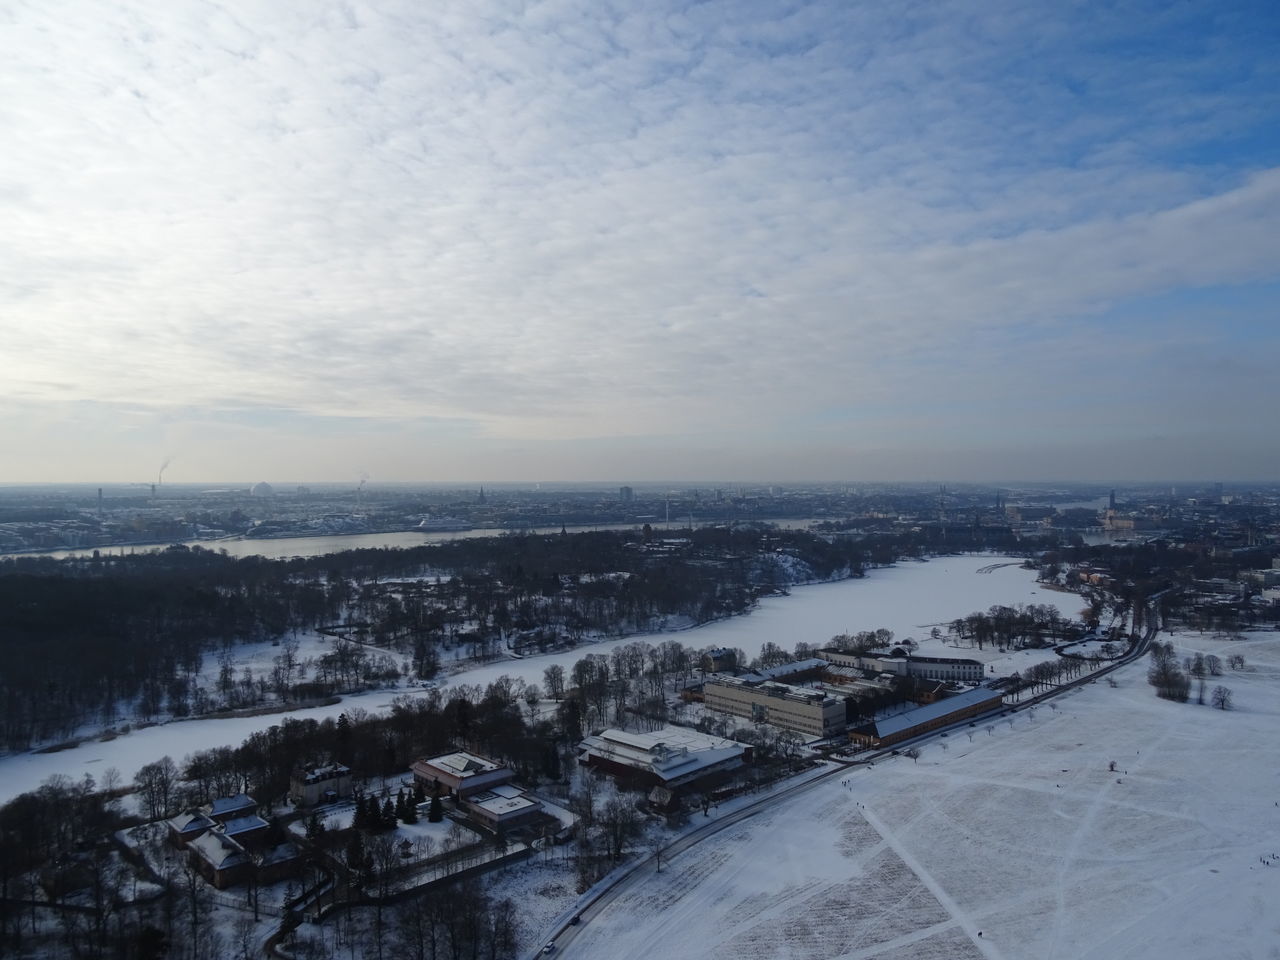 HIGH ANGLE VIEW OF TOWN DURING WINTER